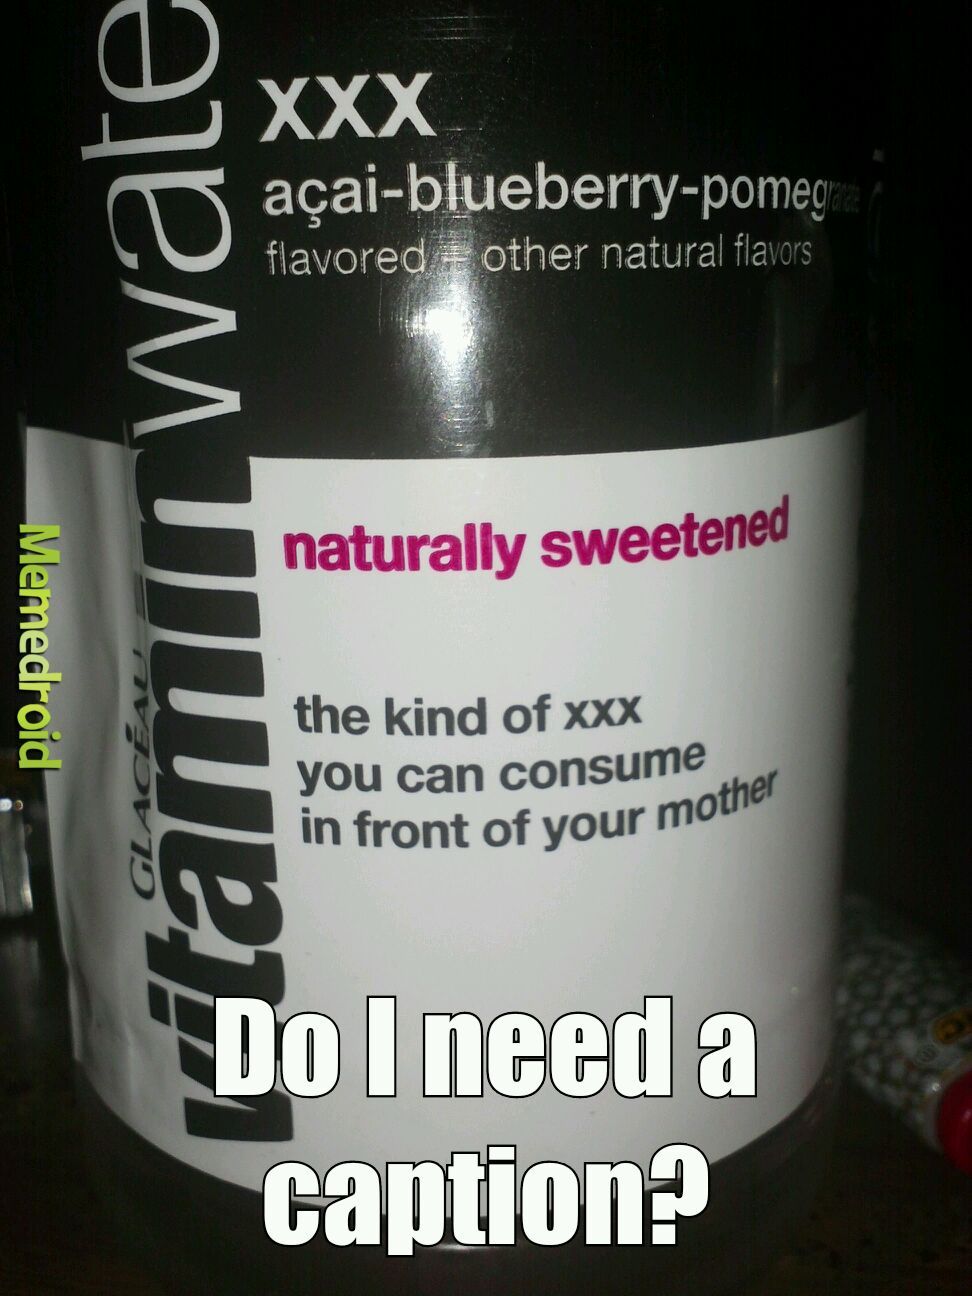 The vitamin we really want is.... - meme